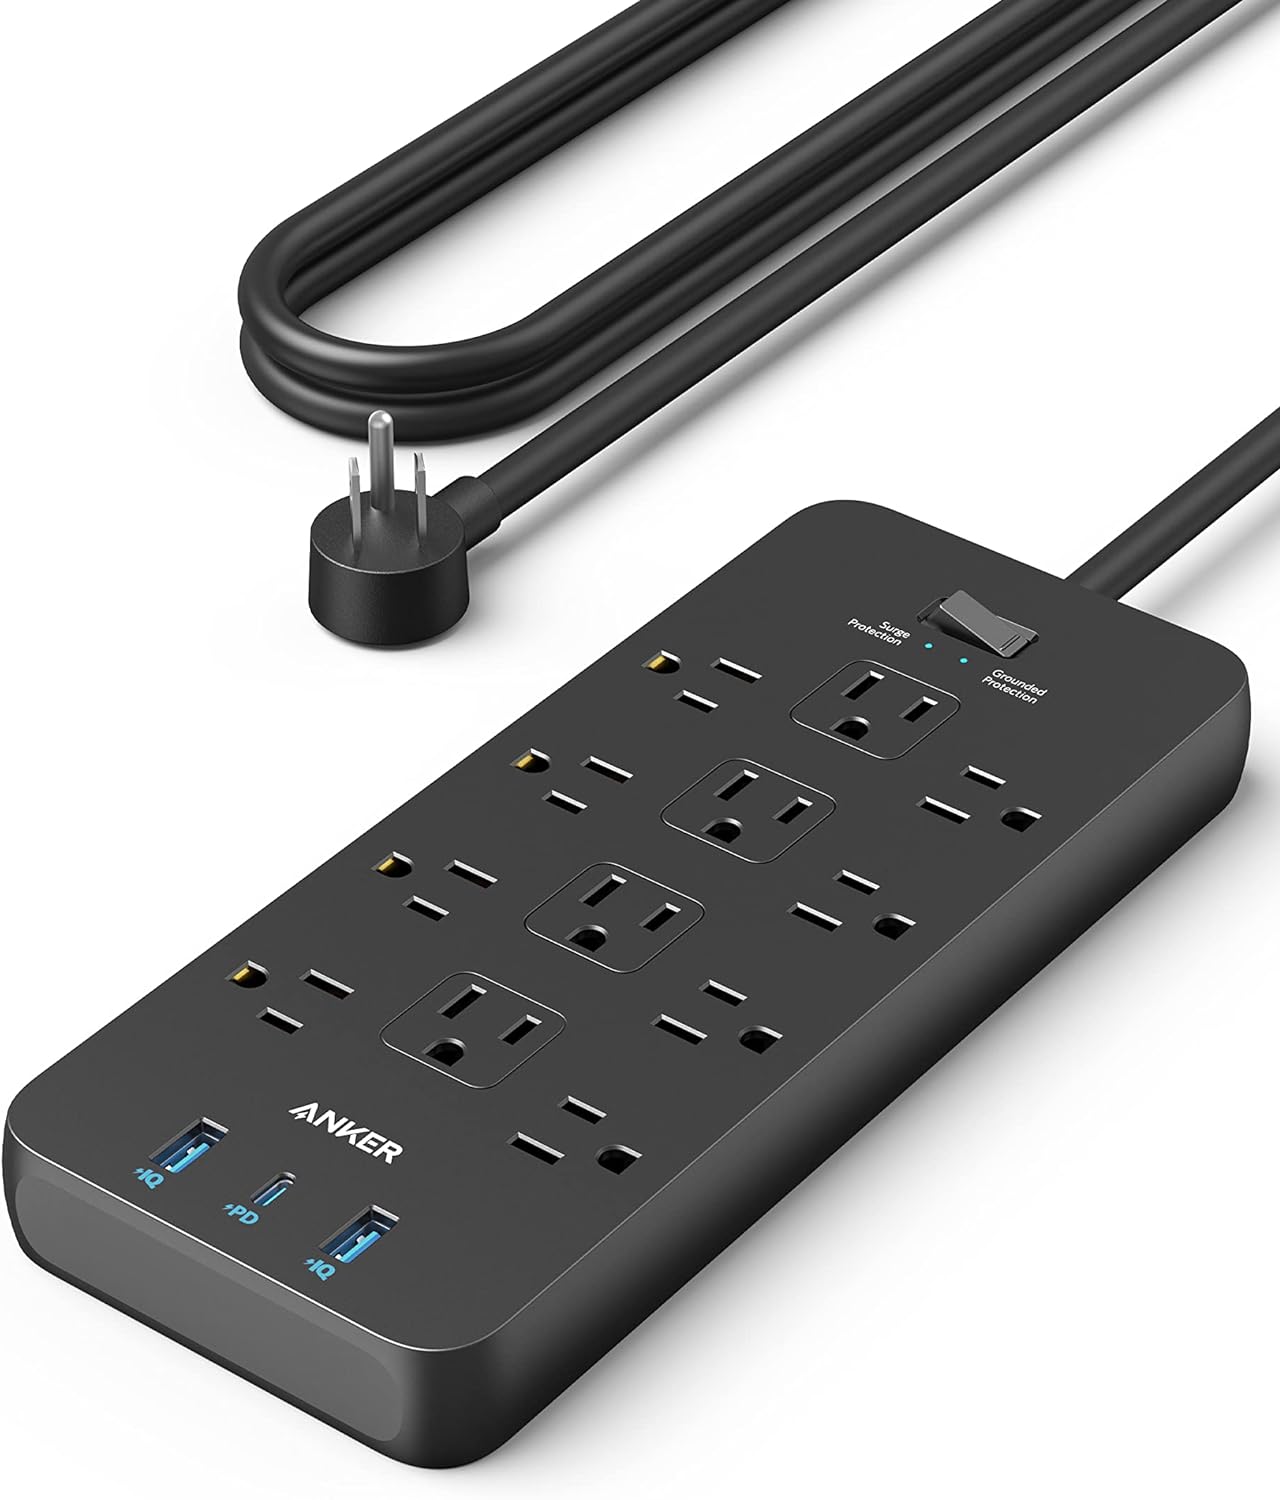 Anker 12 Outlets with 1 USB C and 2 USB Ports $21.99 at AnkerDirect via Amazon